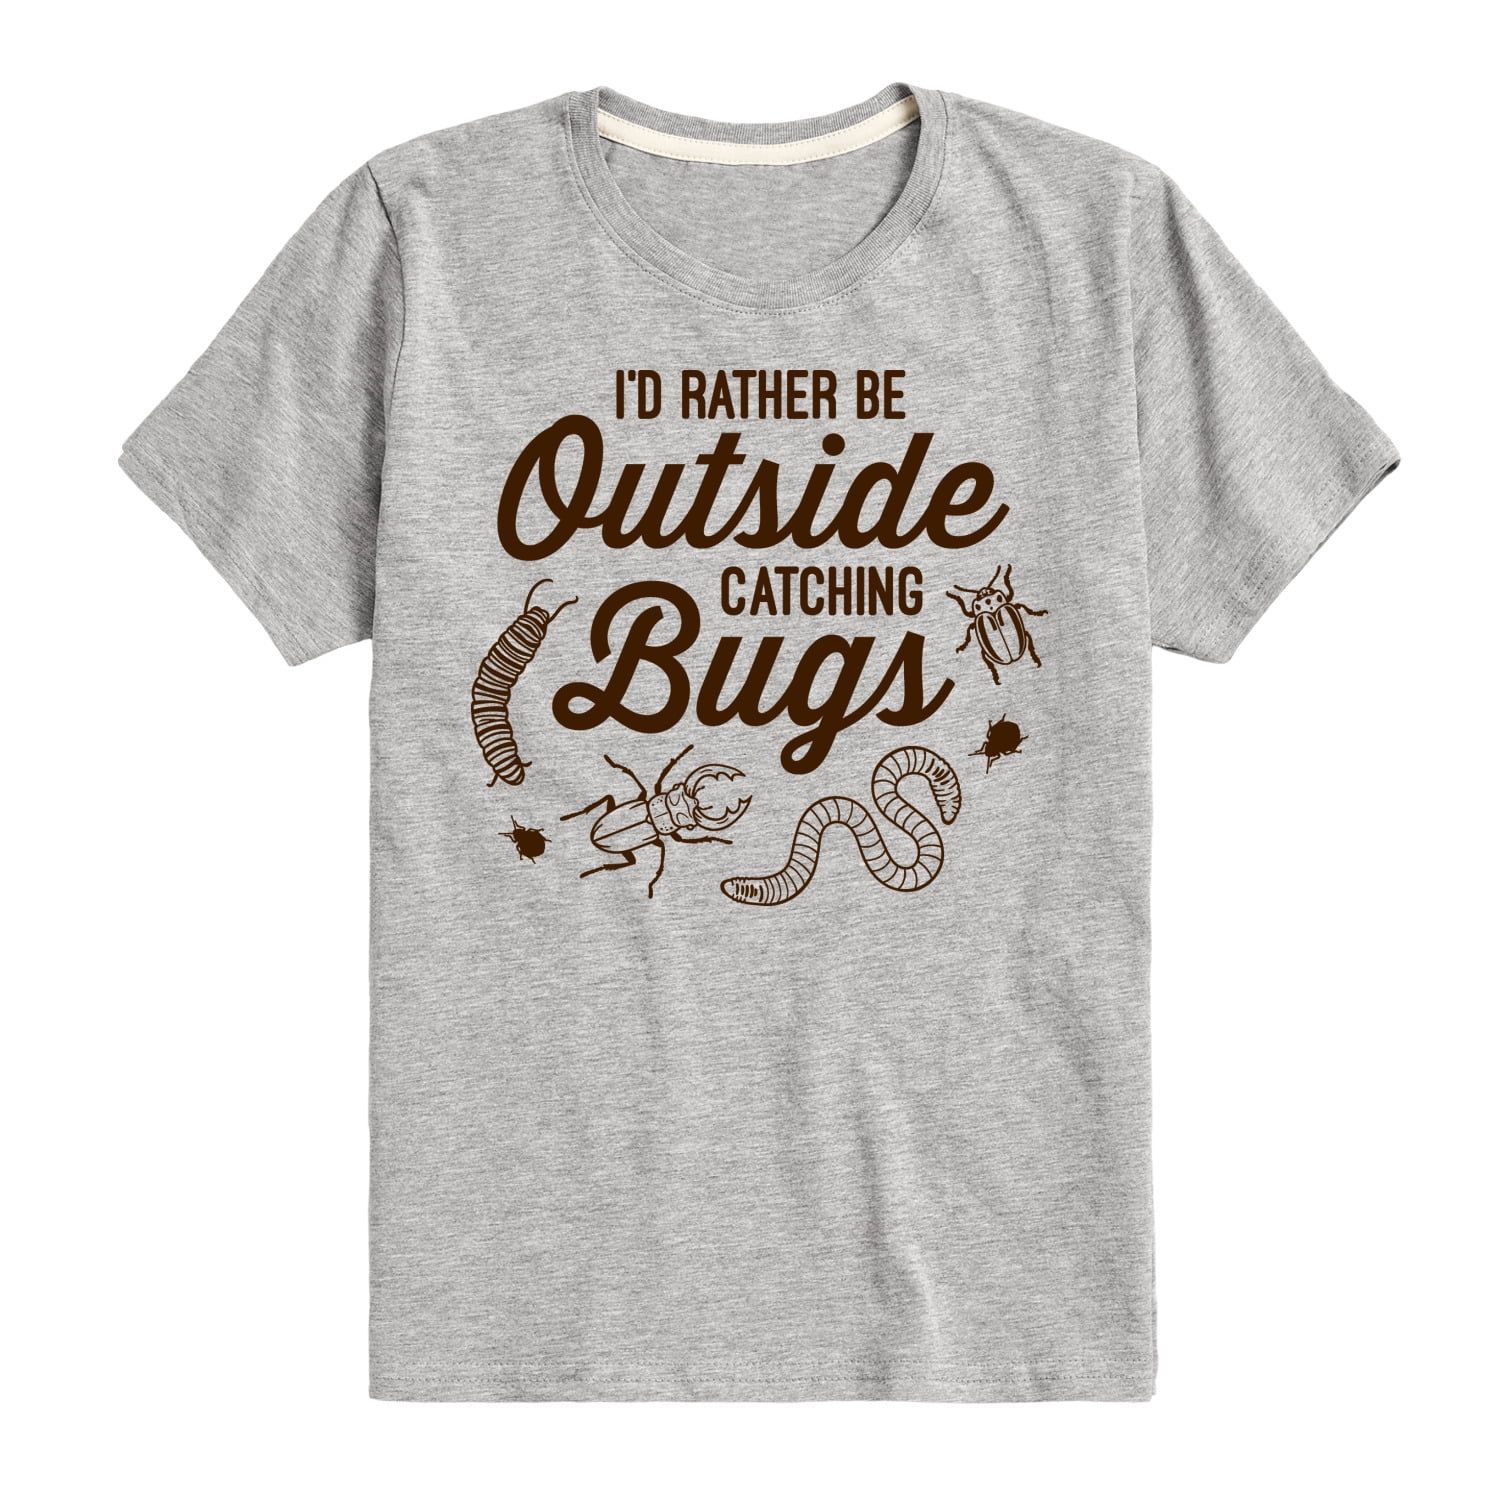 Instant Message - Rather Be Outside Catching Bugs - Toddler & Youth Short Sleeve Graphic T-Shirt | Walmart (US)